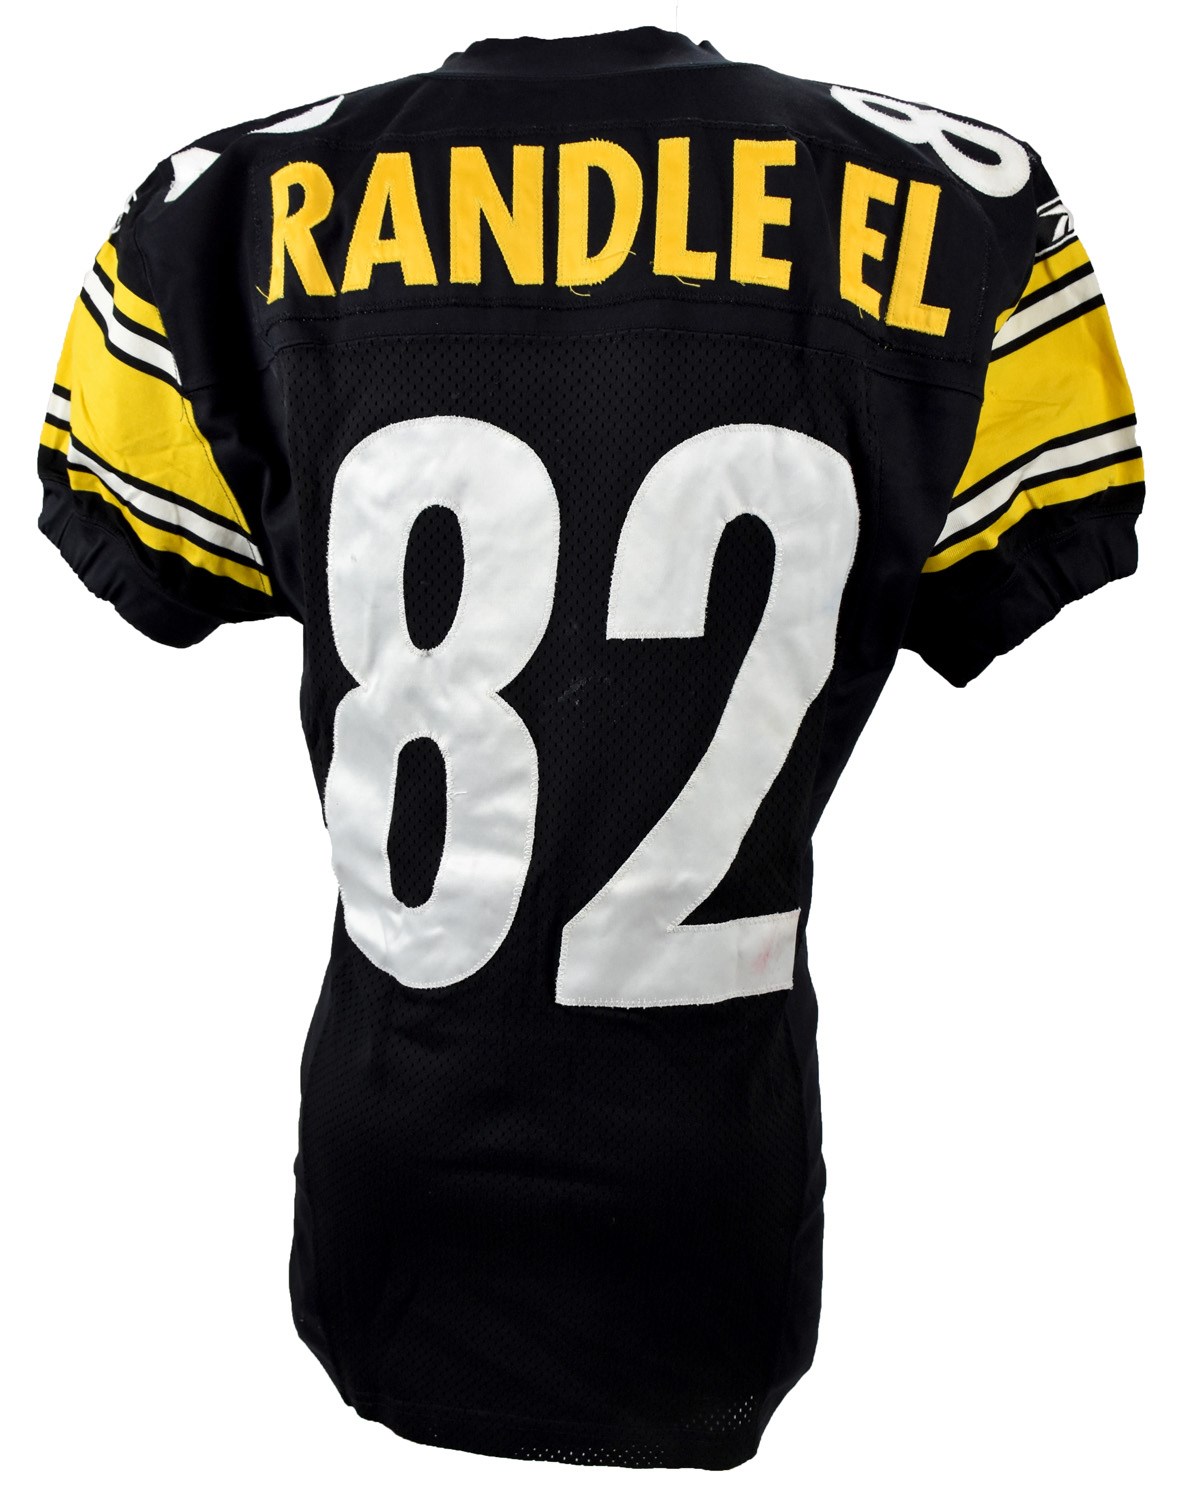 - 2002 Antwaan Randle El Pittsburgh Steelers Game Worn Rookie Jersey  (Photo-Matched to 1/5 AFC Winning Pass & 12/29 TD Reception)